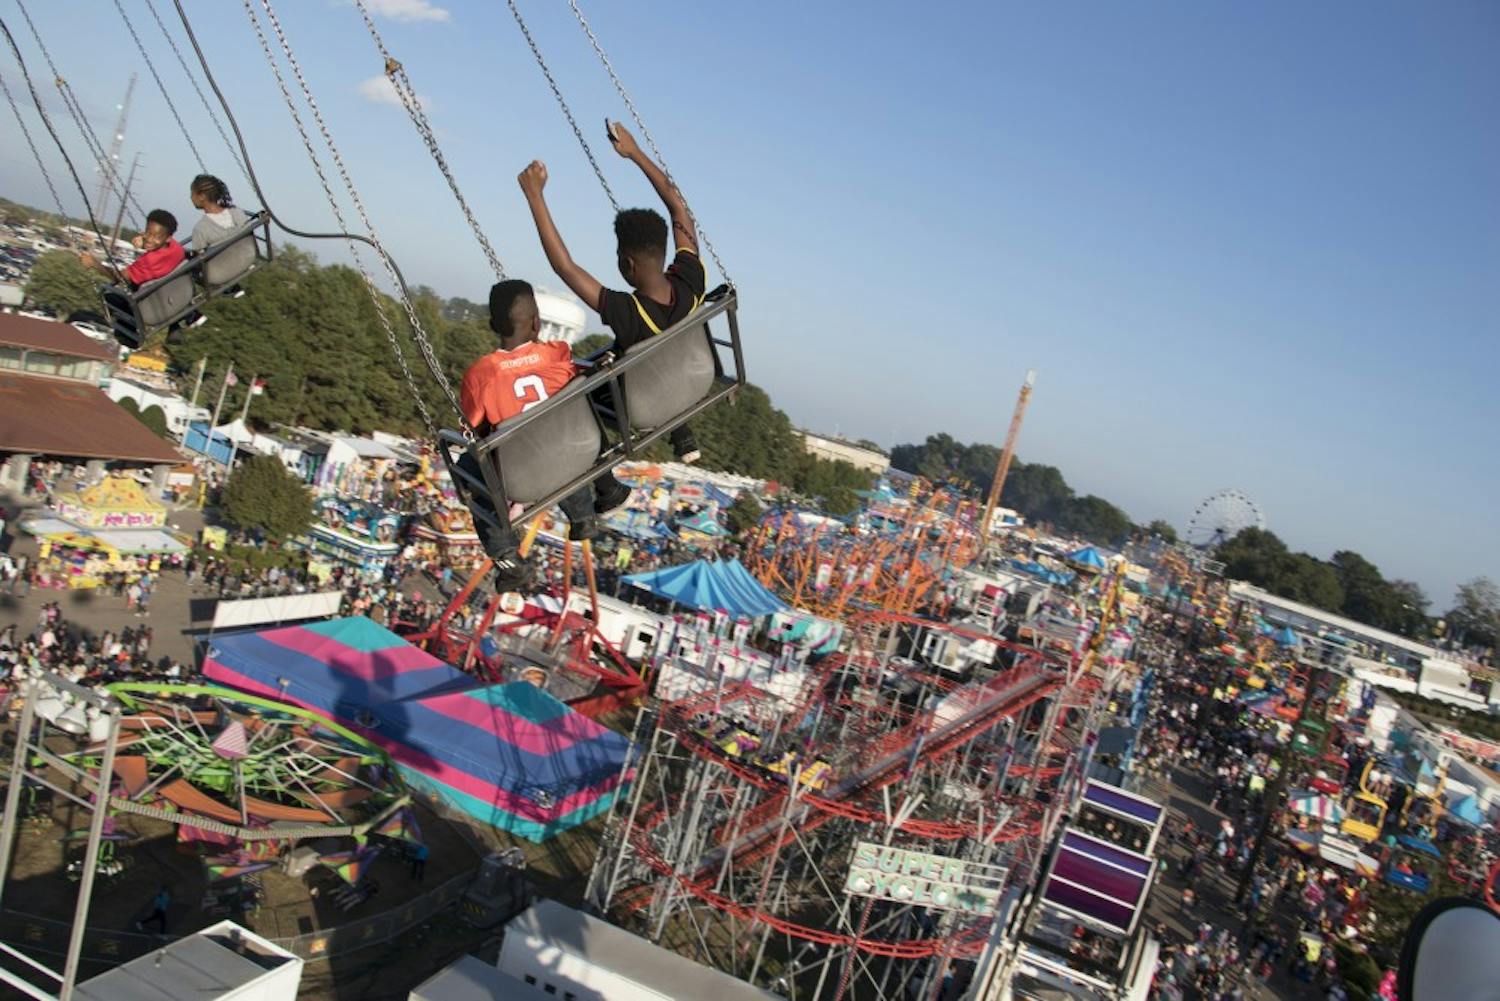 Two children ride the swing ride, overlooking the entire midway.